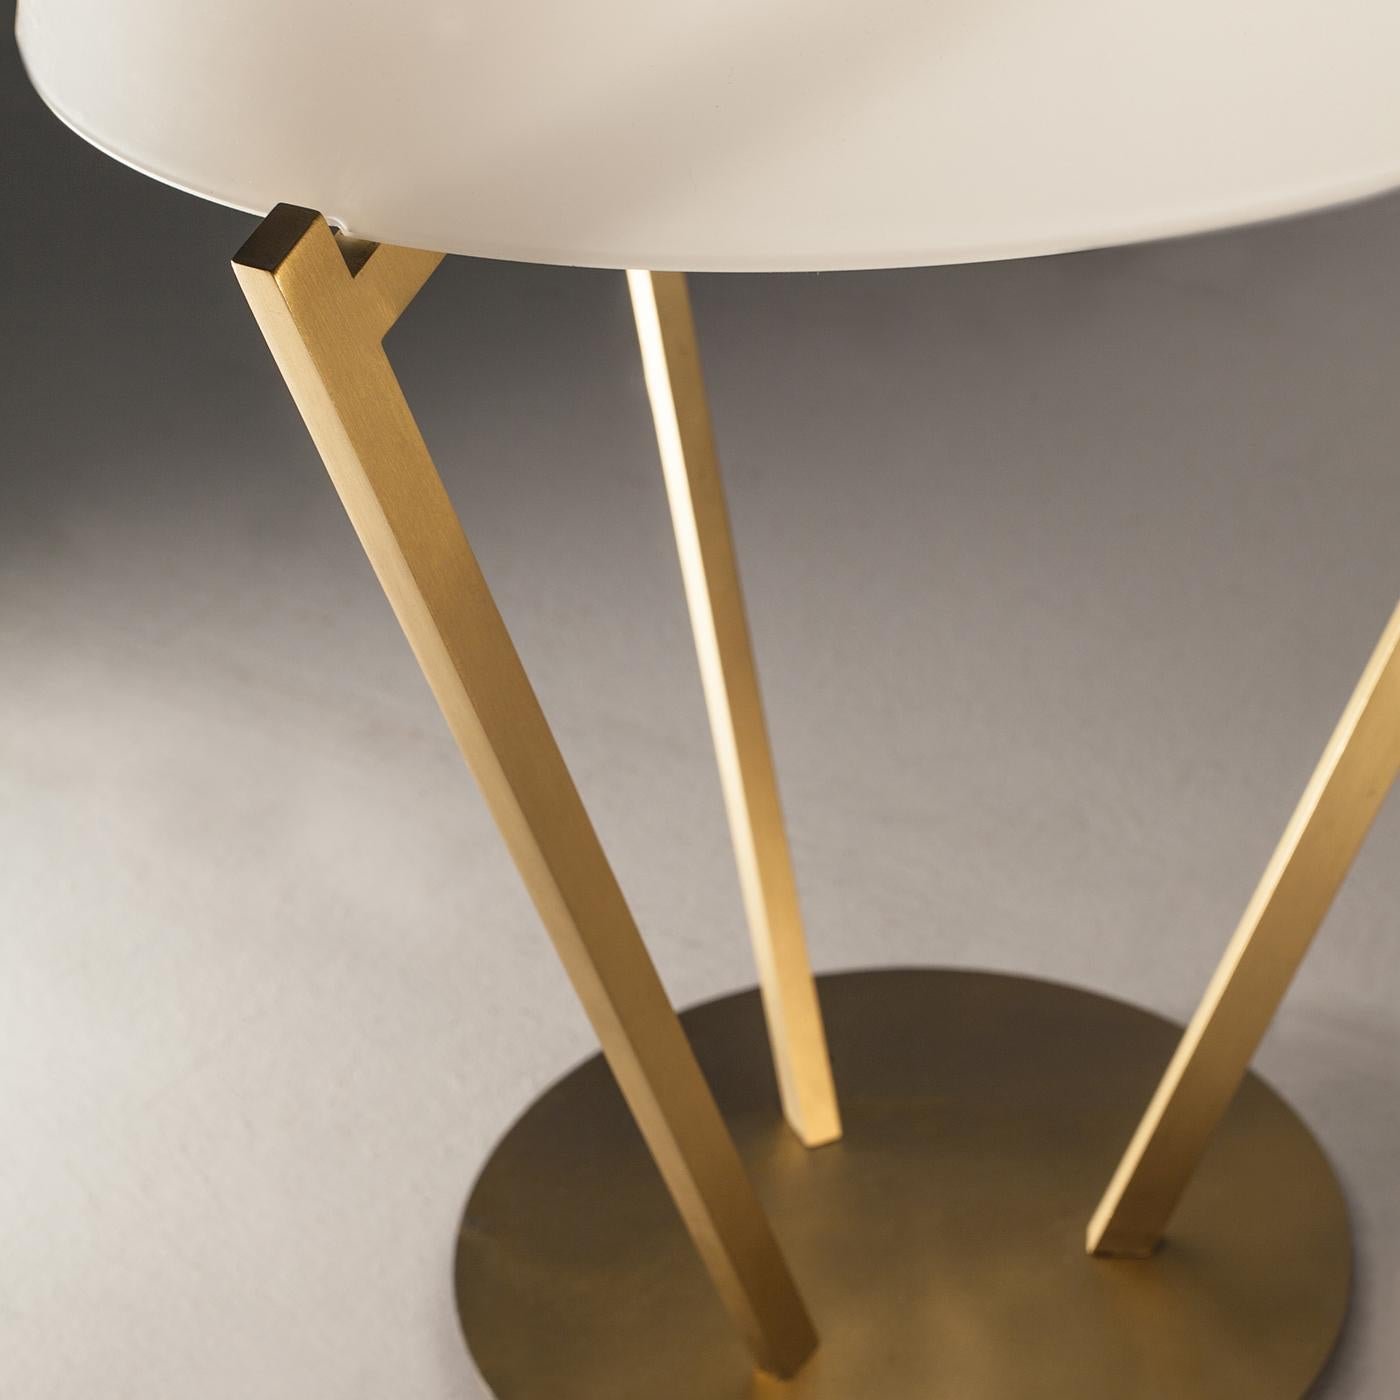 The Zena table lamp has brass structure available in light satin gold, while the diffusor is in opal glass. Measures are 20 x 20 x 36 cm; the lamp has a wall adapter with dimmer. It's perfect to give a soft light to the environment.\nLight source: